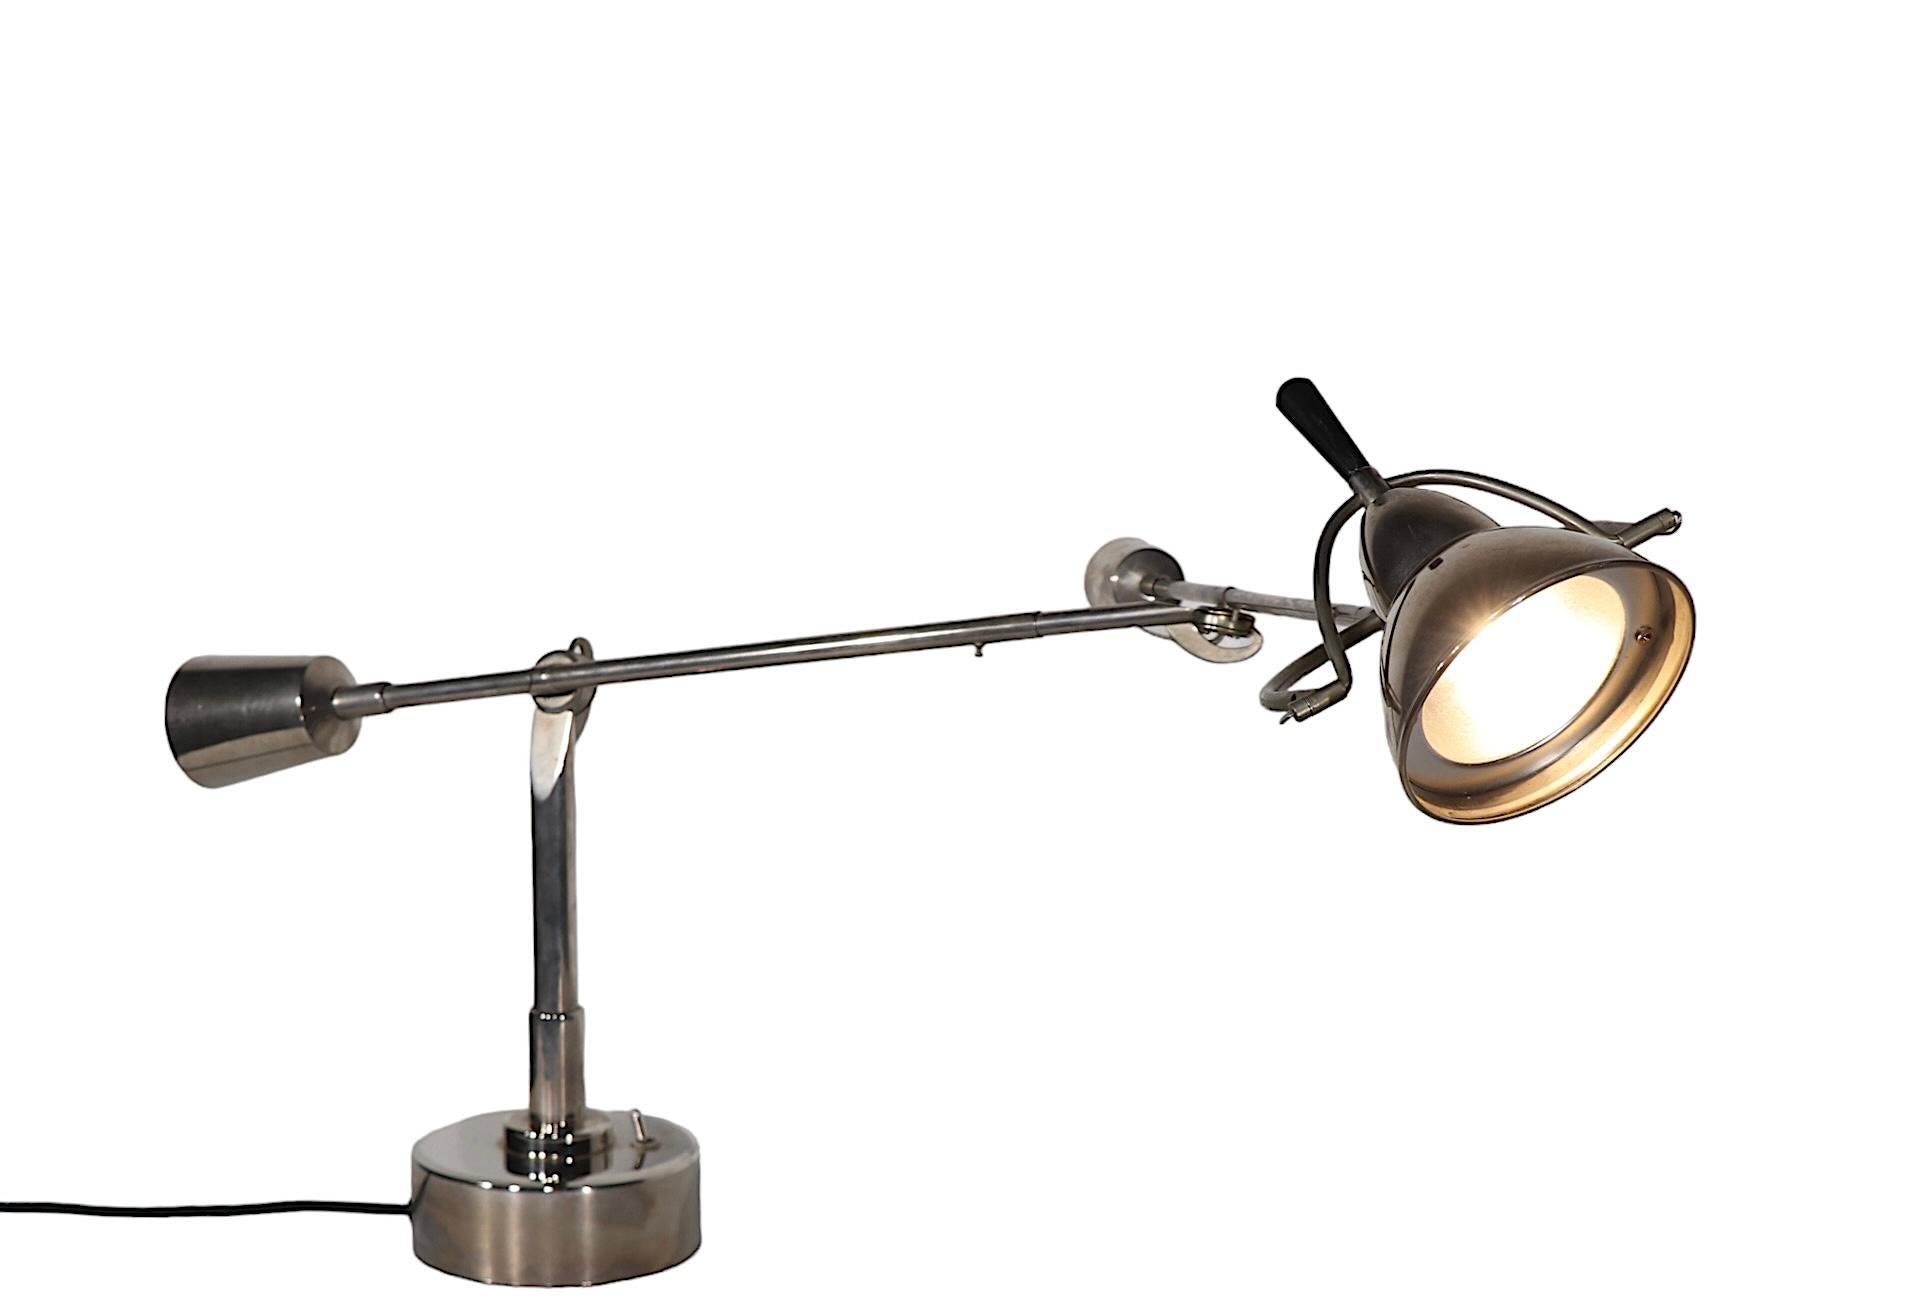 Iconic articulating desk, table lamps, originally designed in the 1920's by Edouard Wilfred Buquet, this example is circa 1990's. The lamp features two arms, which are fully jointed, and the hood shade swivels and tilts to position the light. Well